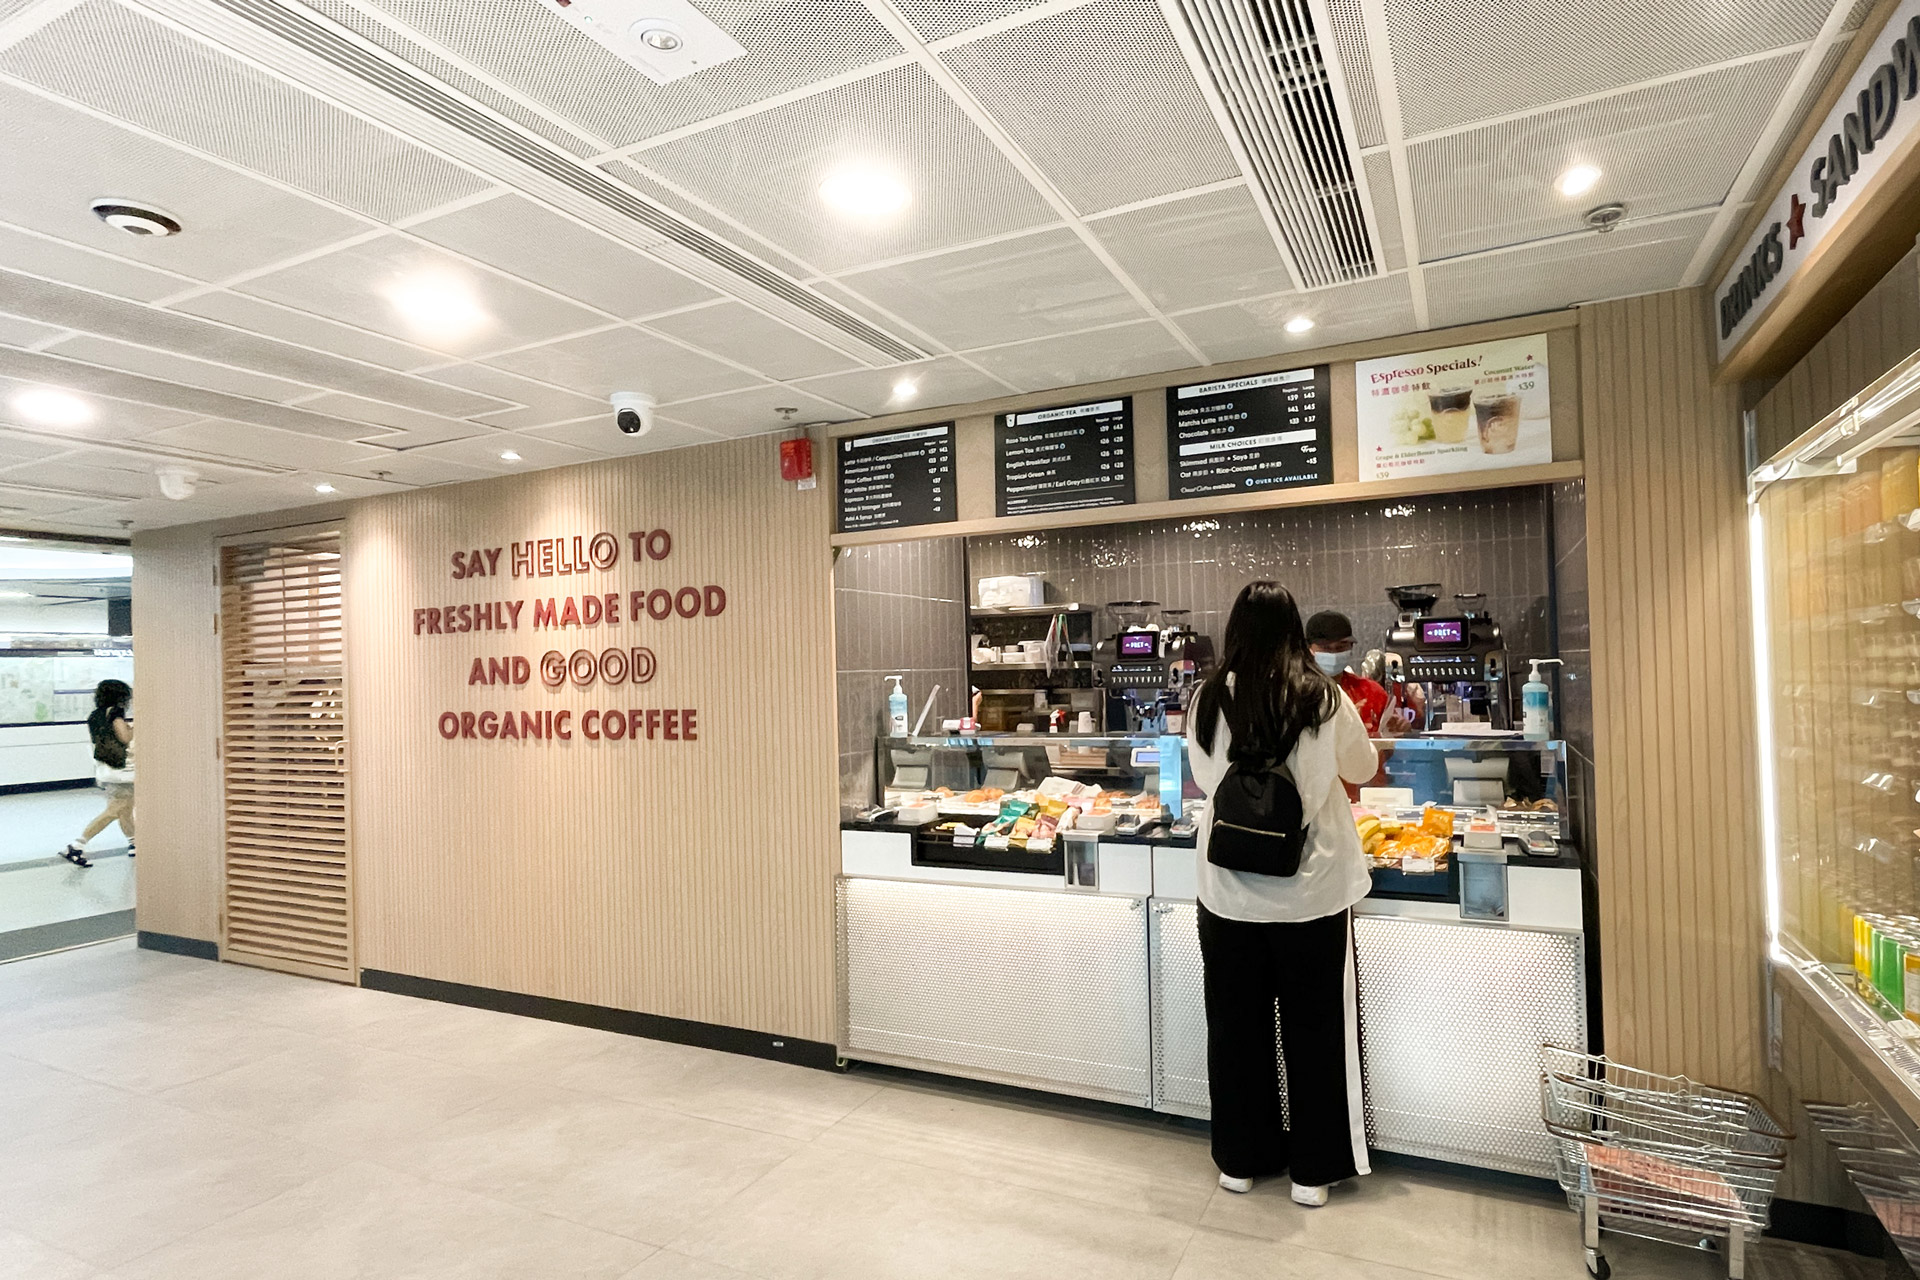 Pret A Manger Hung Hom Station Hong Kong Store Interior Design and Styling by Plaap Design